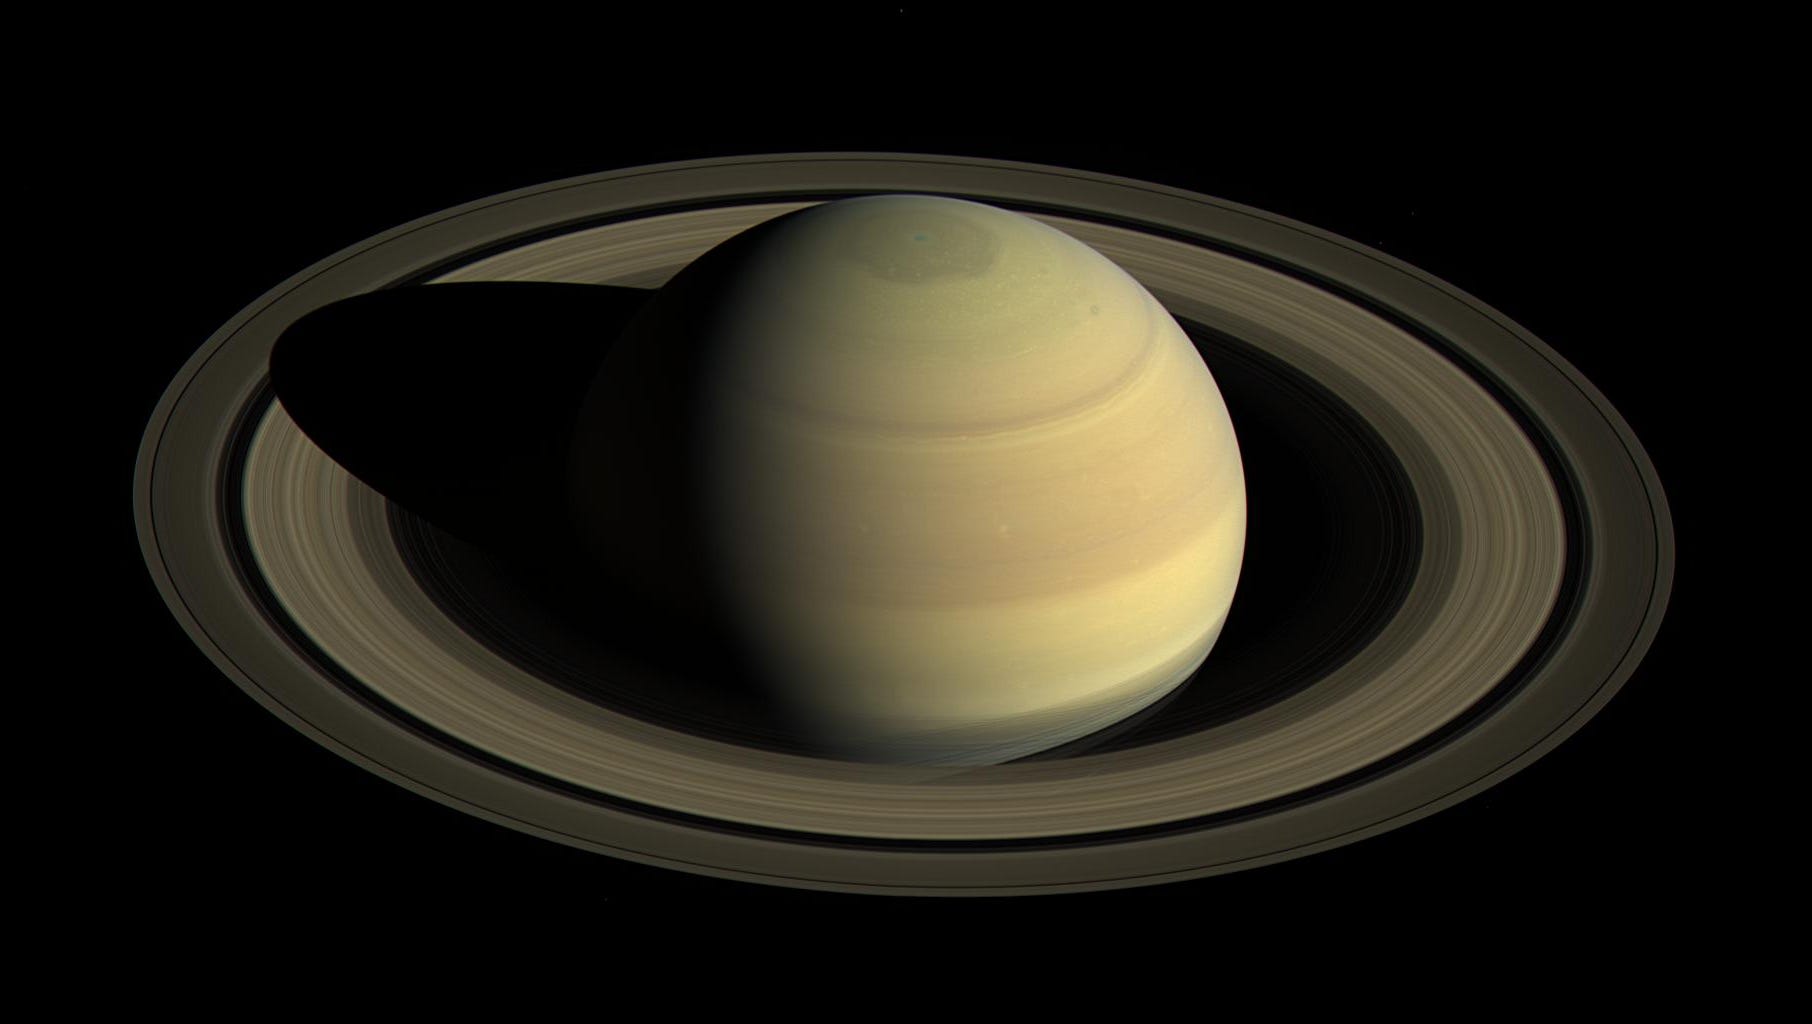 Mystery of Saturn’s rings solved? 